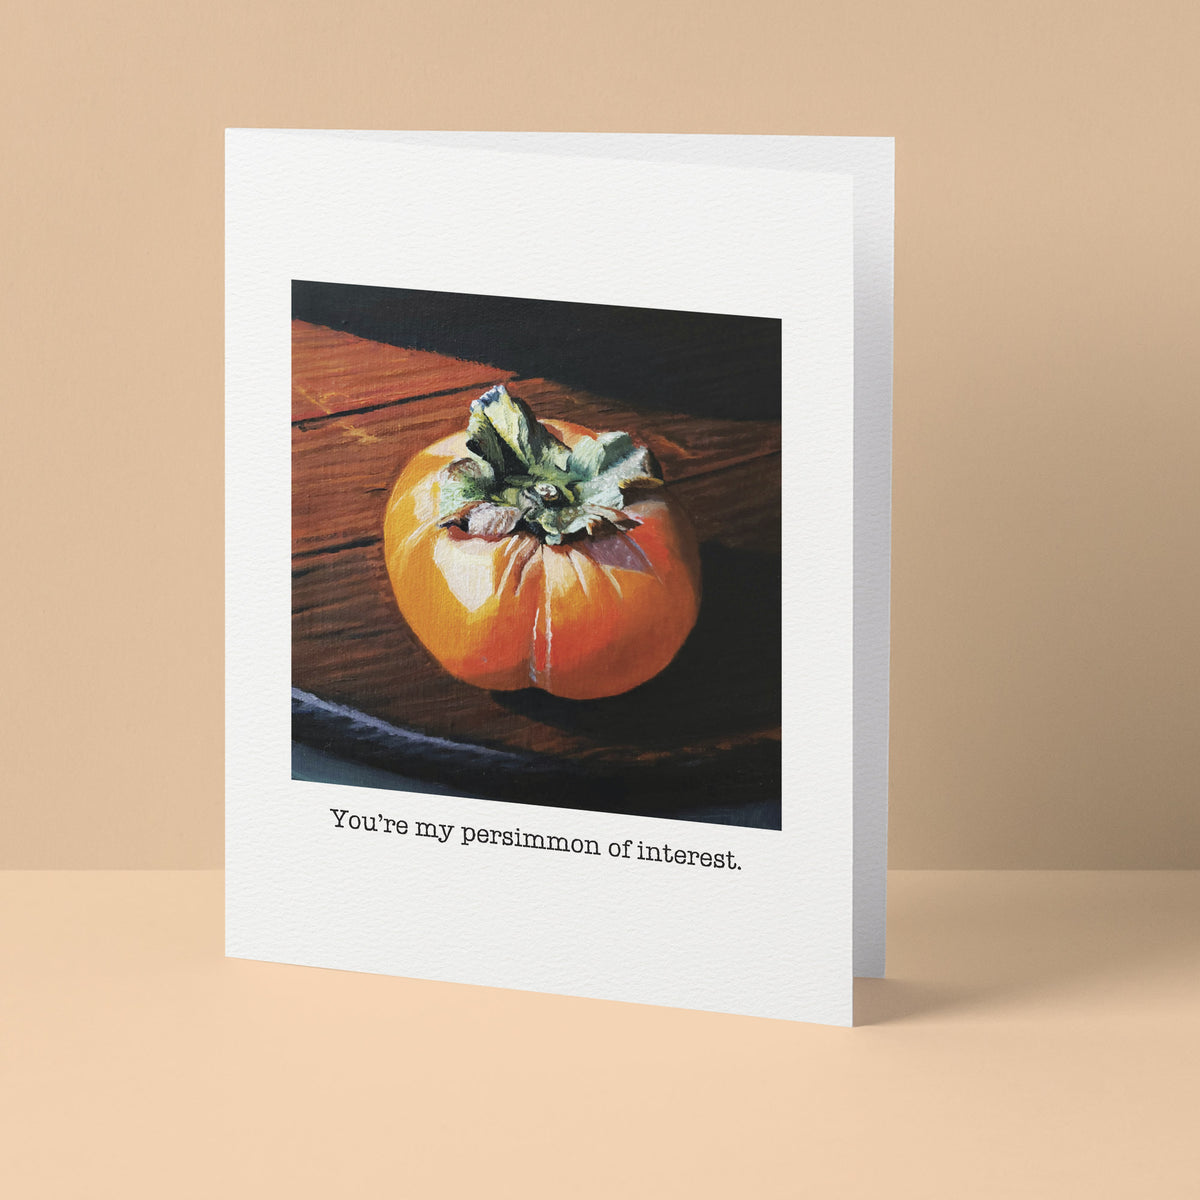 "You're my persimmon of interest" Greeting Card